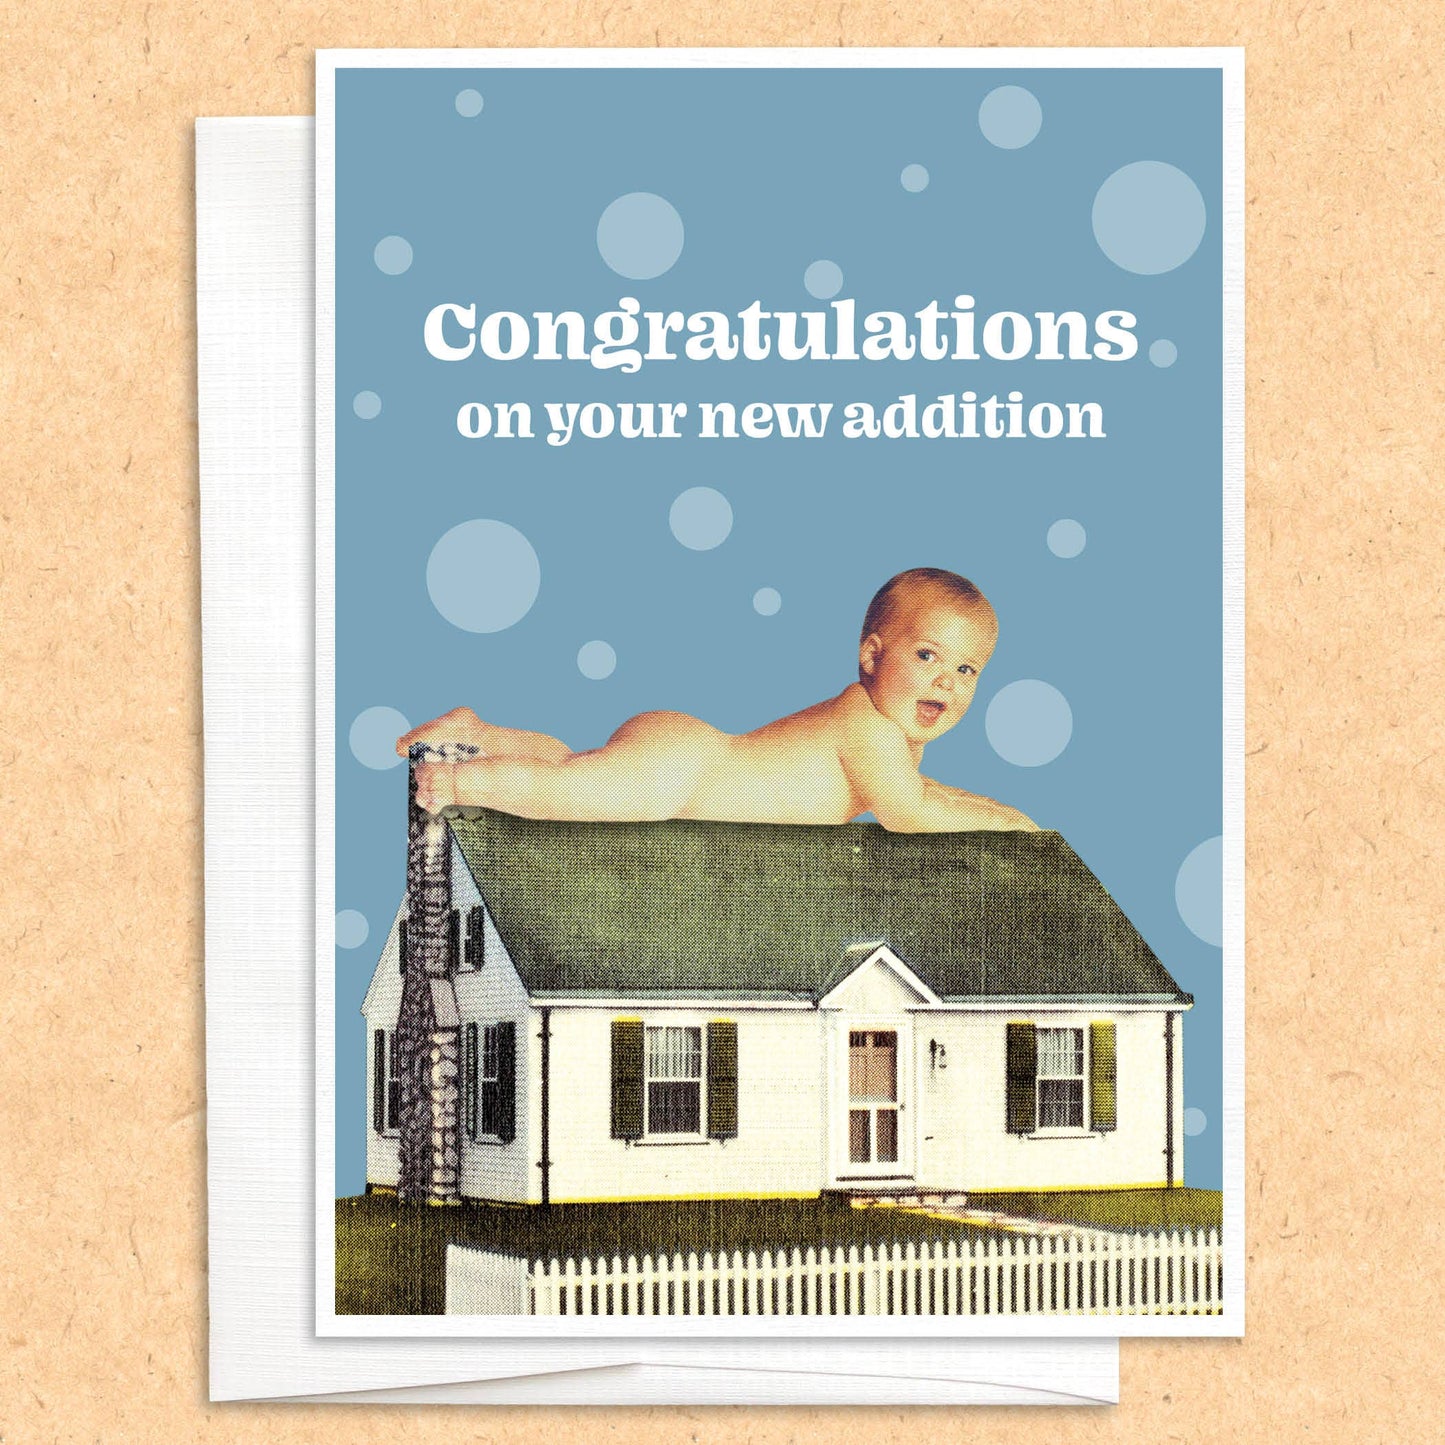 Congrats on Your New Addition Baby funny quirky greeting card